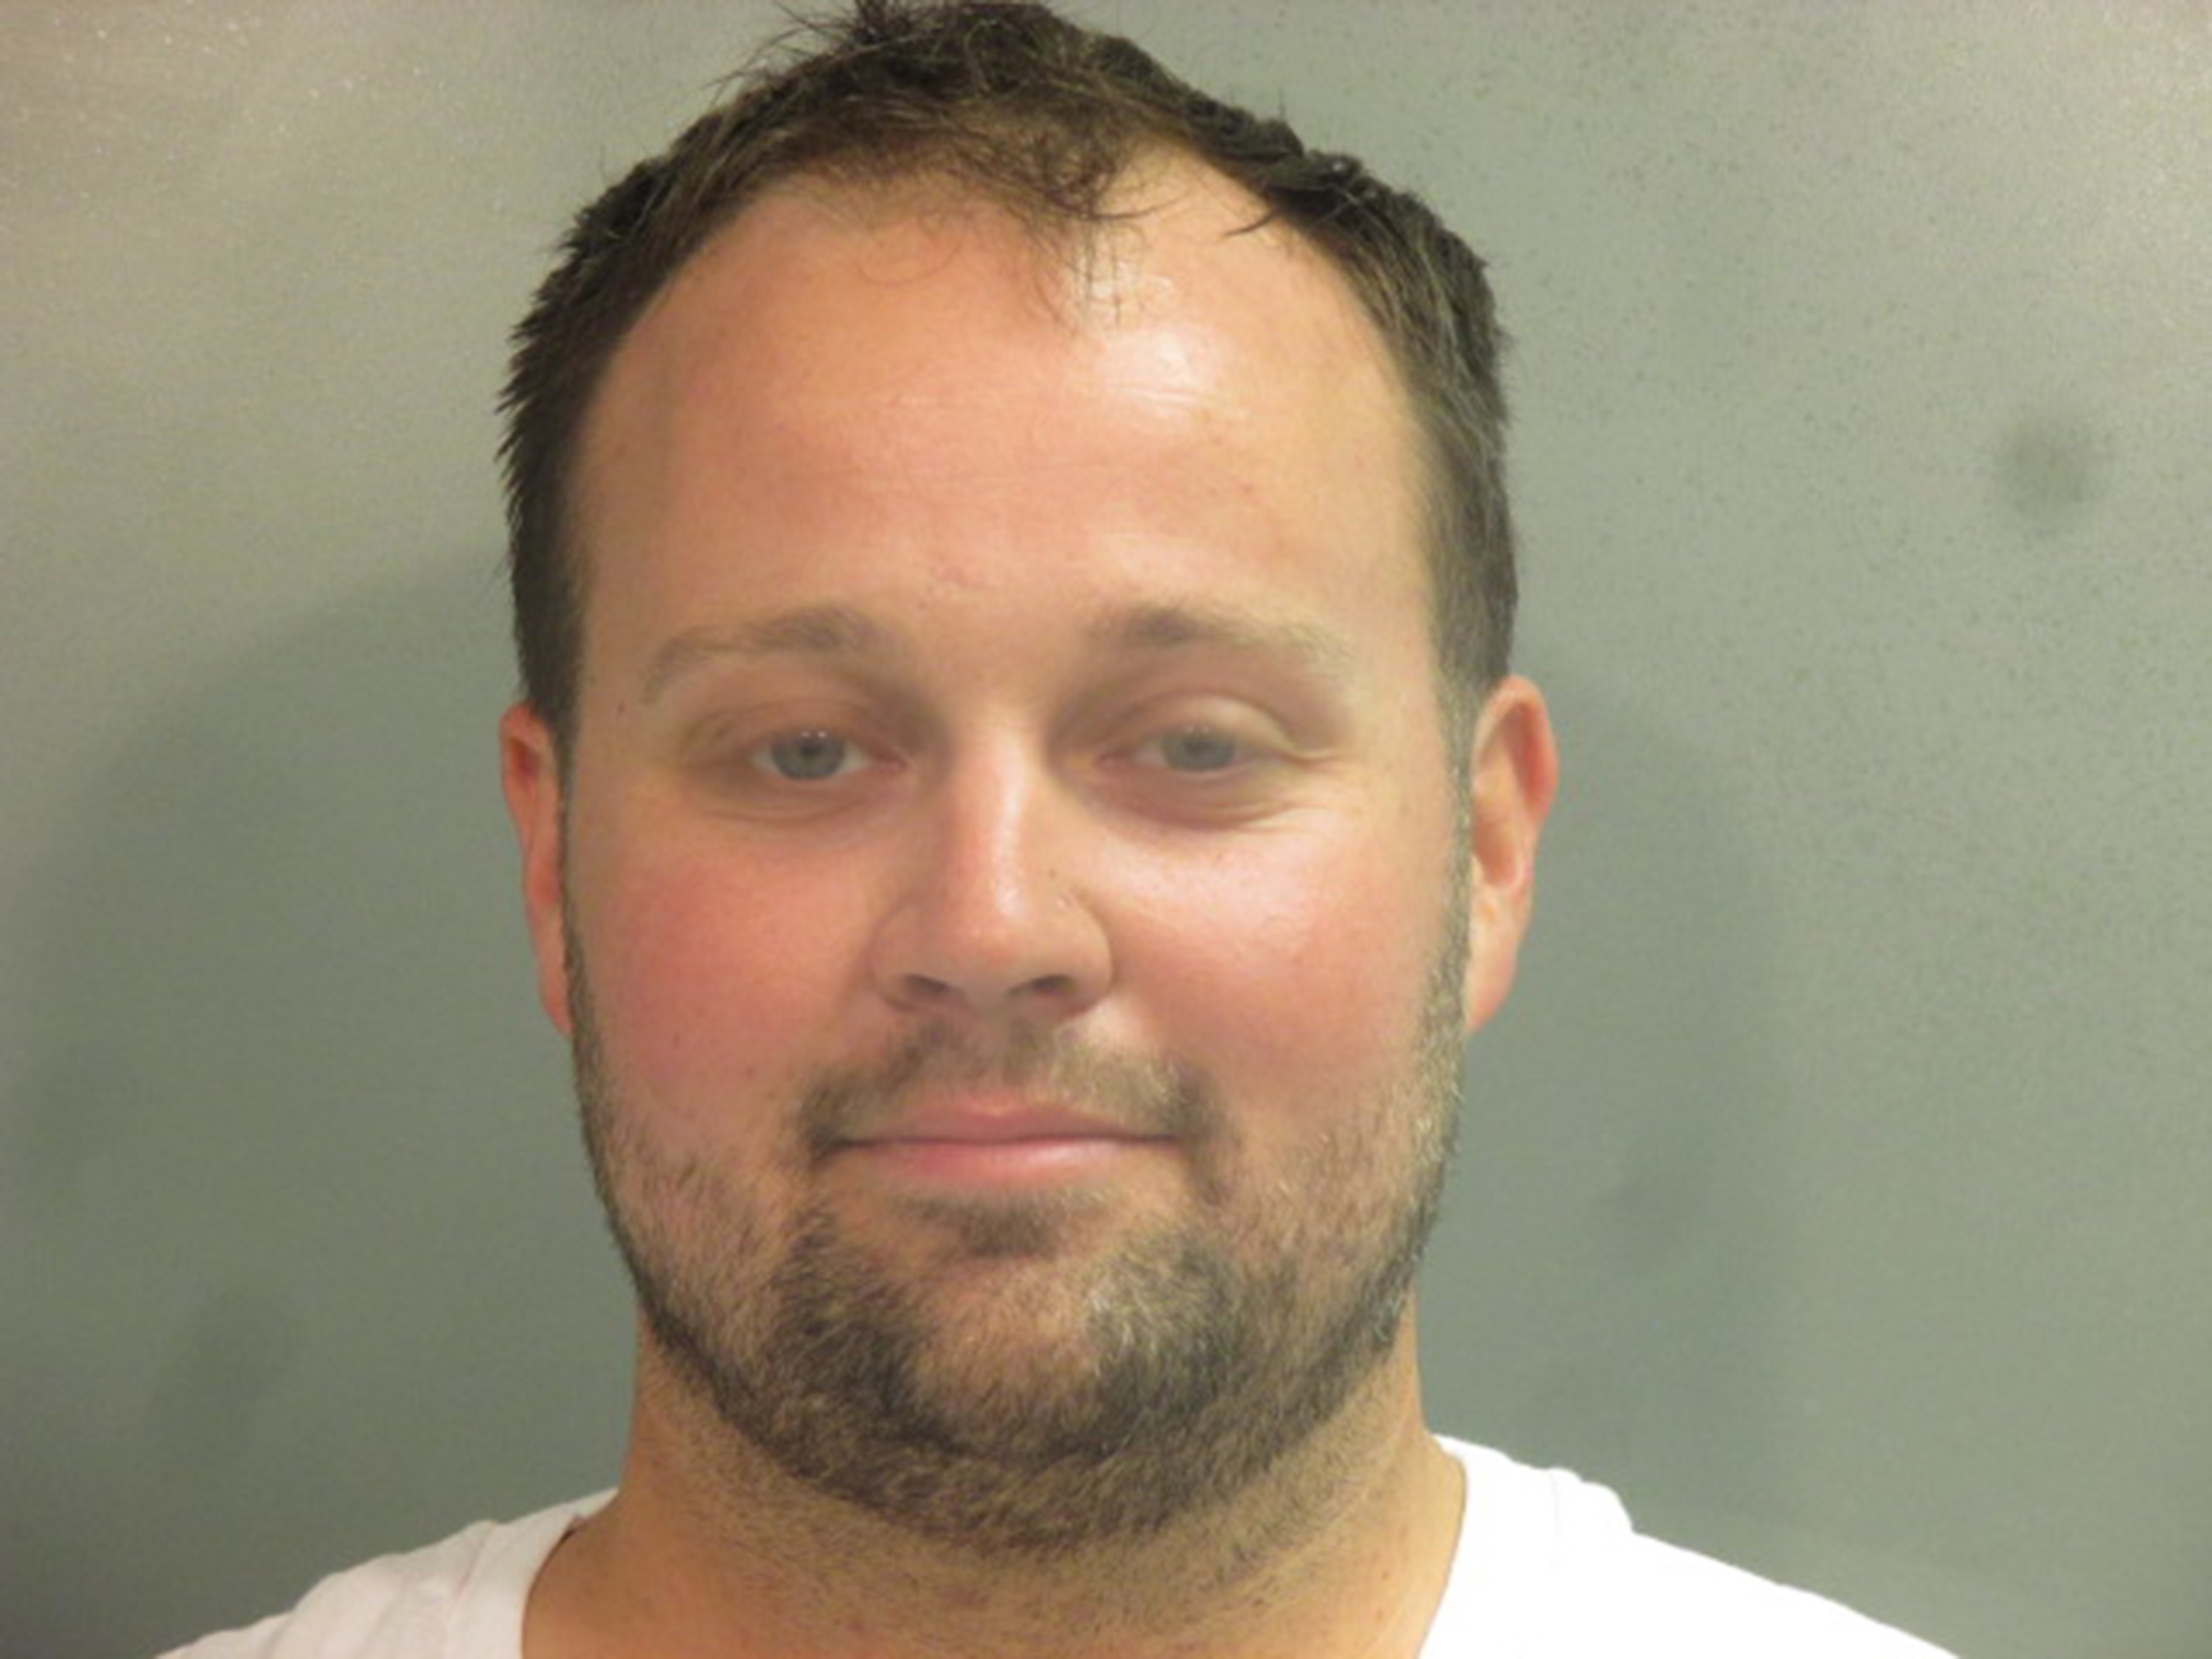 Josh Duggar's booking photo following his arrest on child pornography charges. Josh Duggar's trial took place in December 2021. He was found guilty